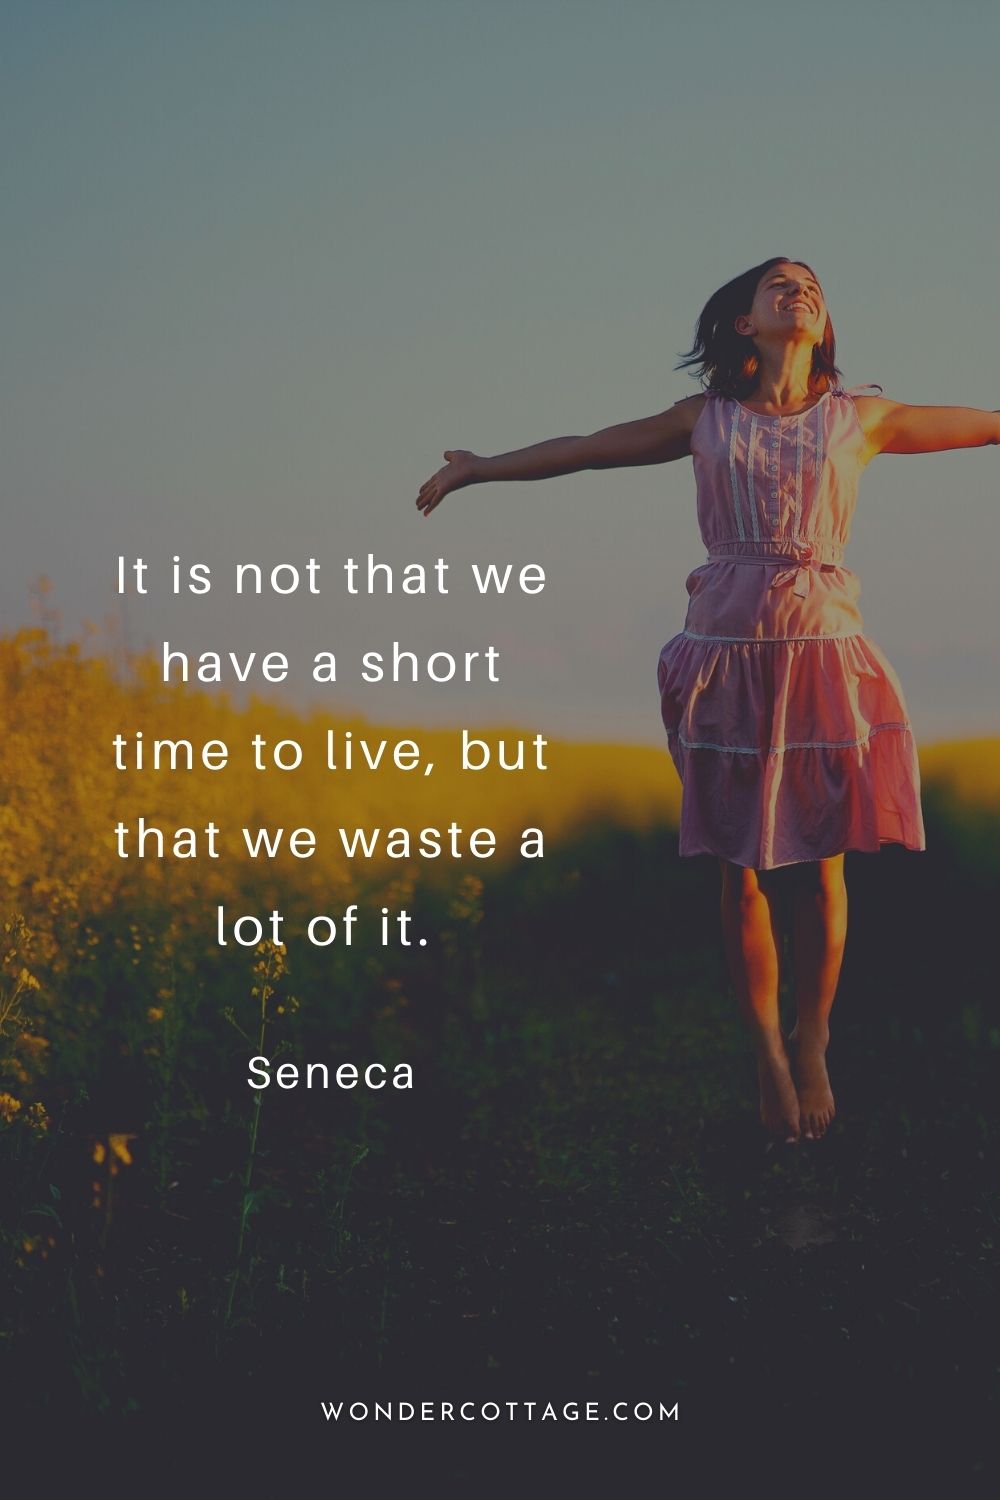 It is not that we have a short time to live, but that we waste a lot of it.  Seneca